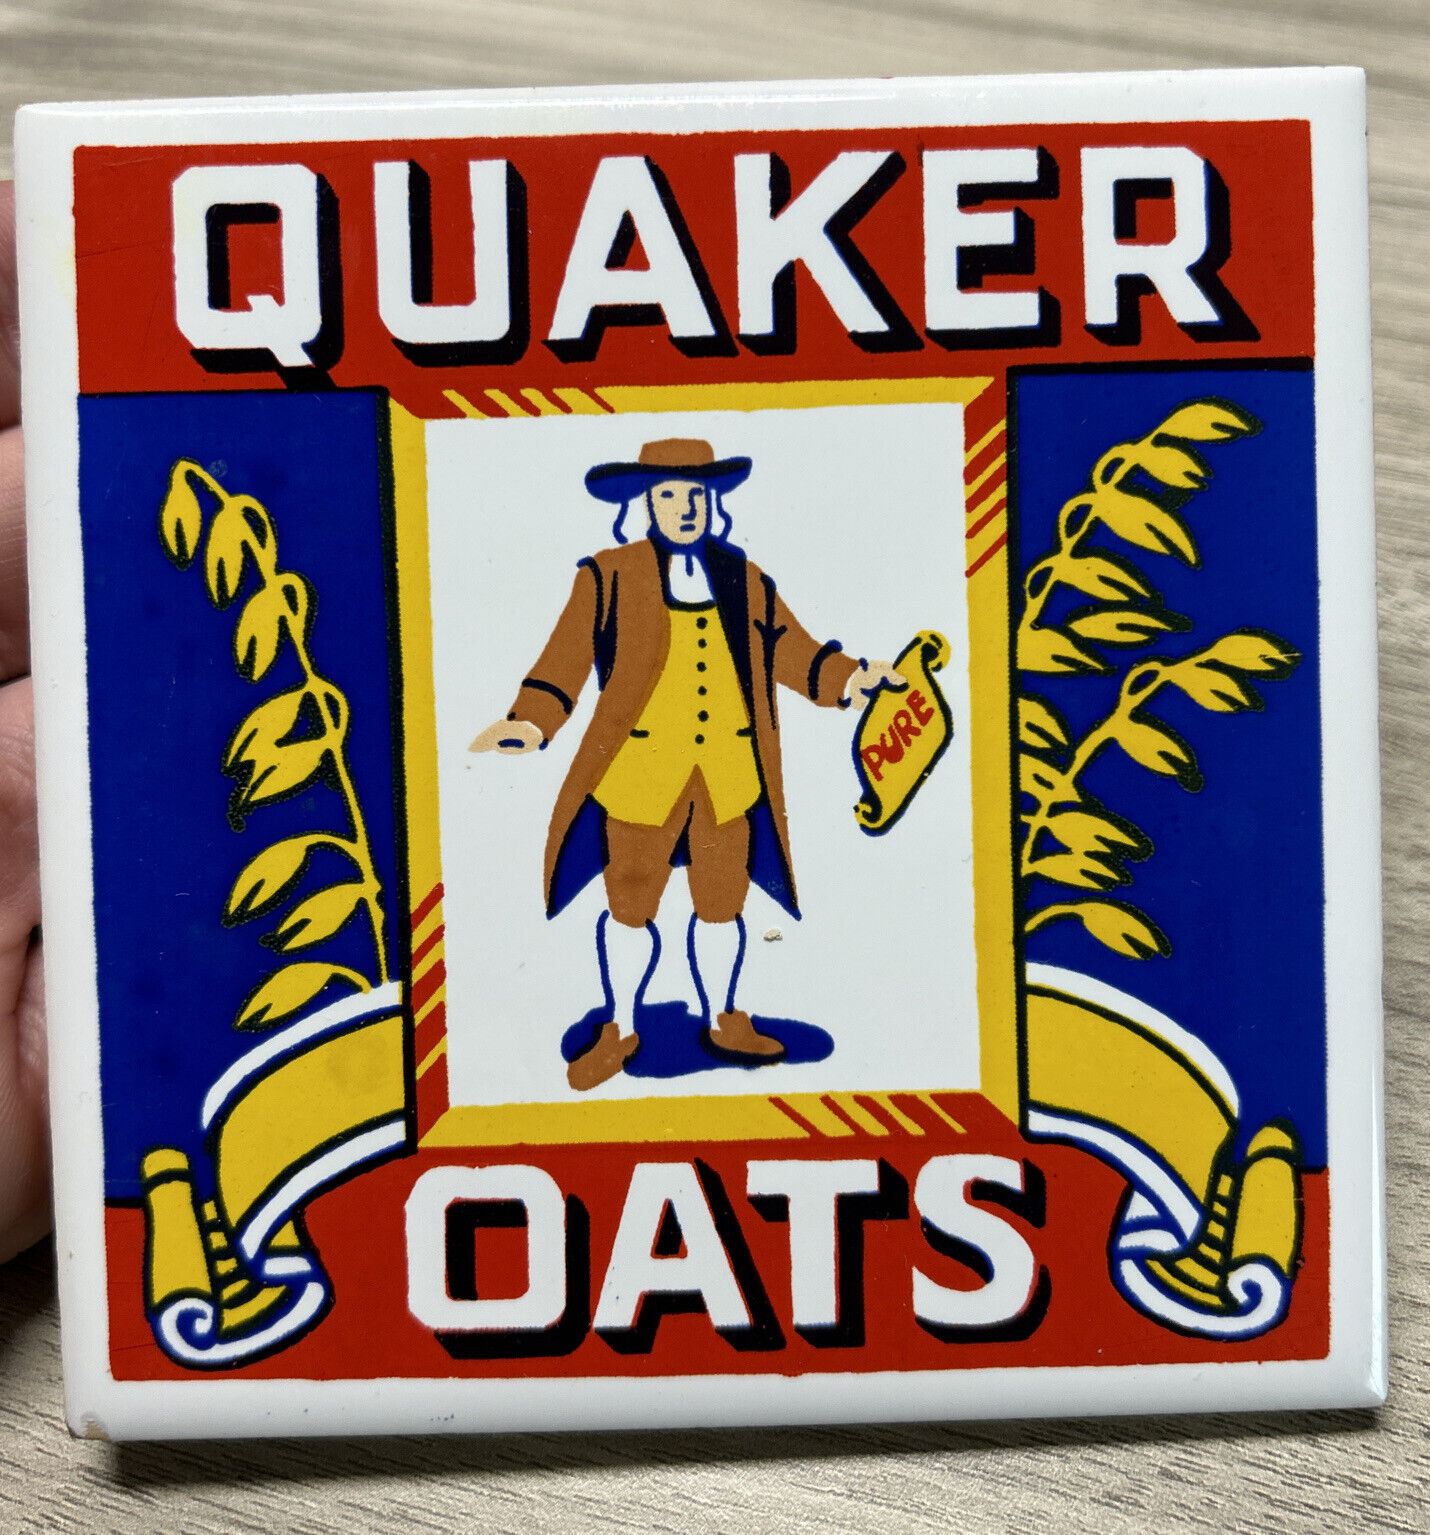 Vintage Quaker Oats Ceramic Drink Coaster 1983 Made In Taiwan